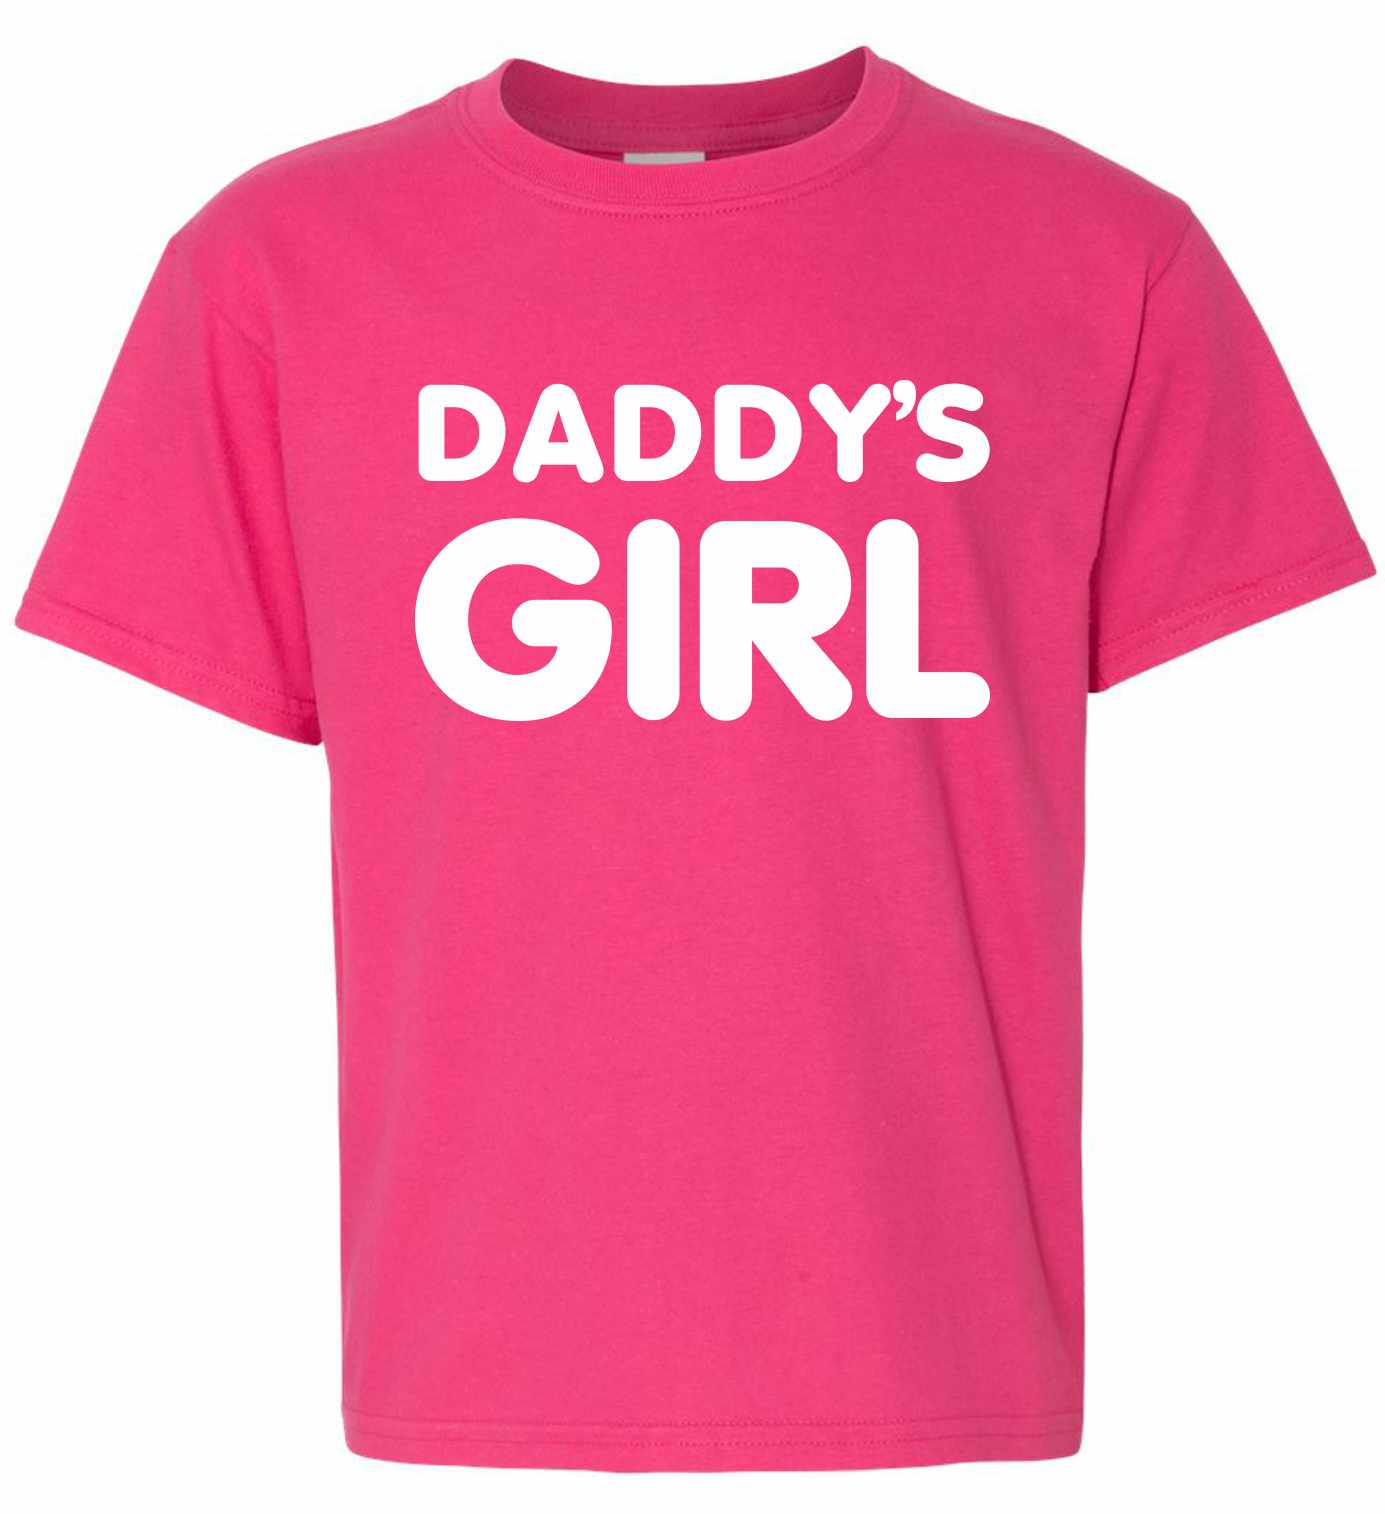 Daddy's Girl on Kids T-Shirt